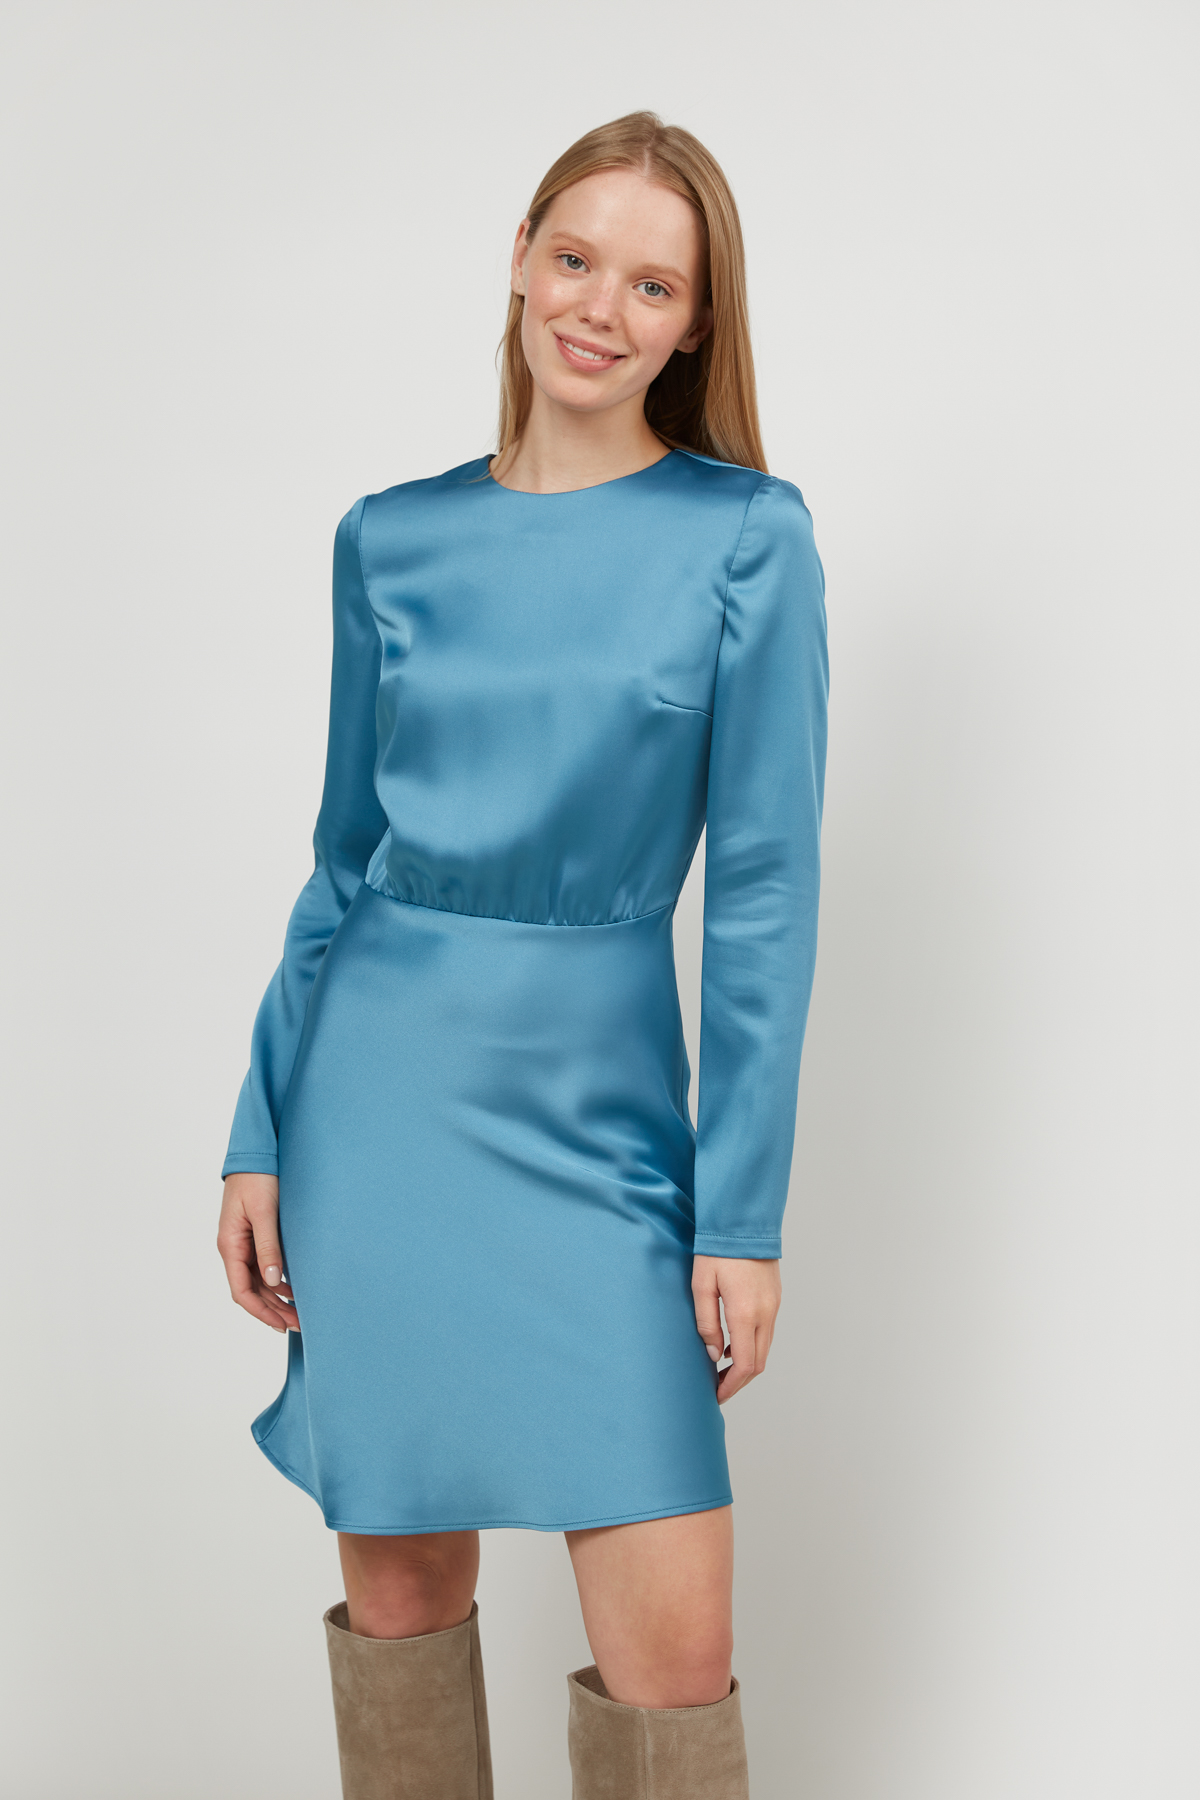 Short blue dress in satin with long sleeves, photo 1